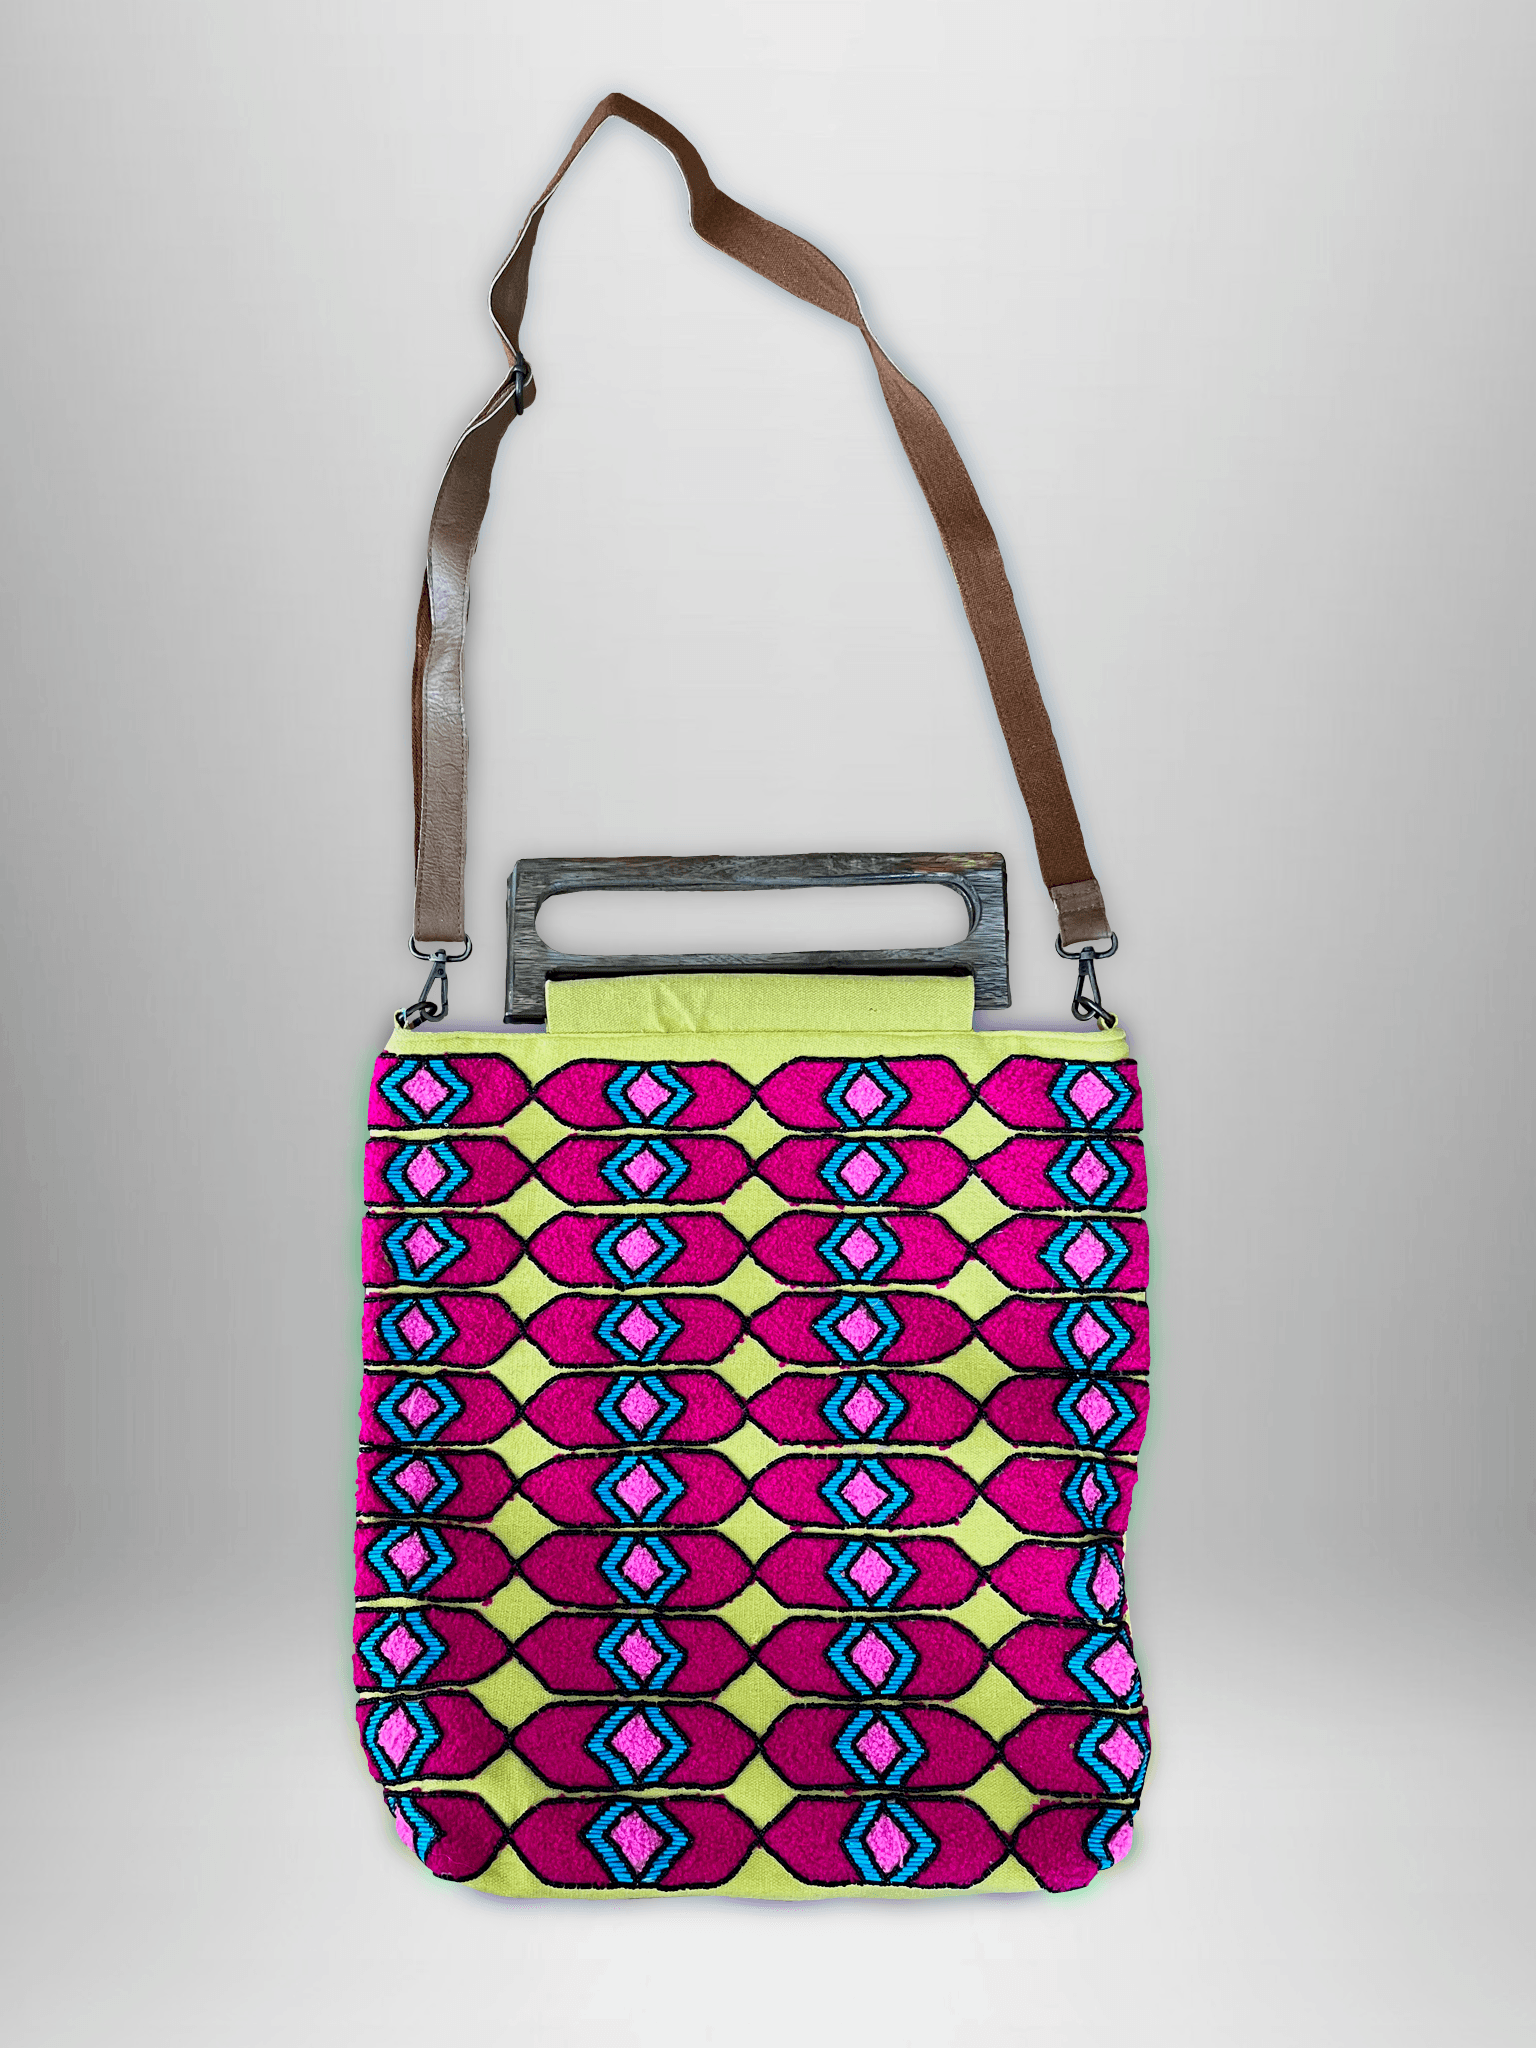 Never Ever Ever Land Tote - Hippie Hued